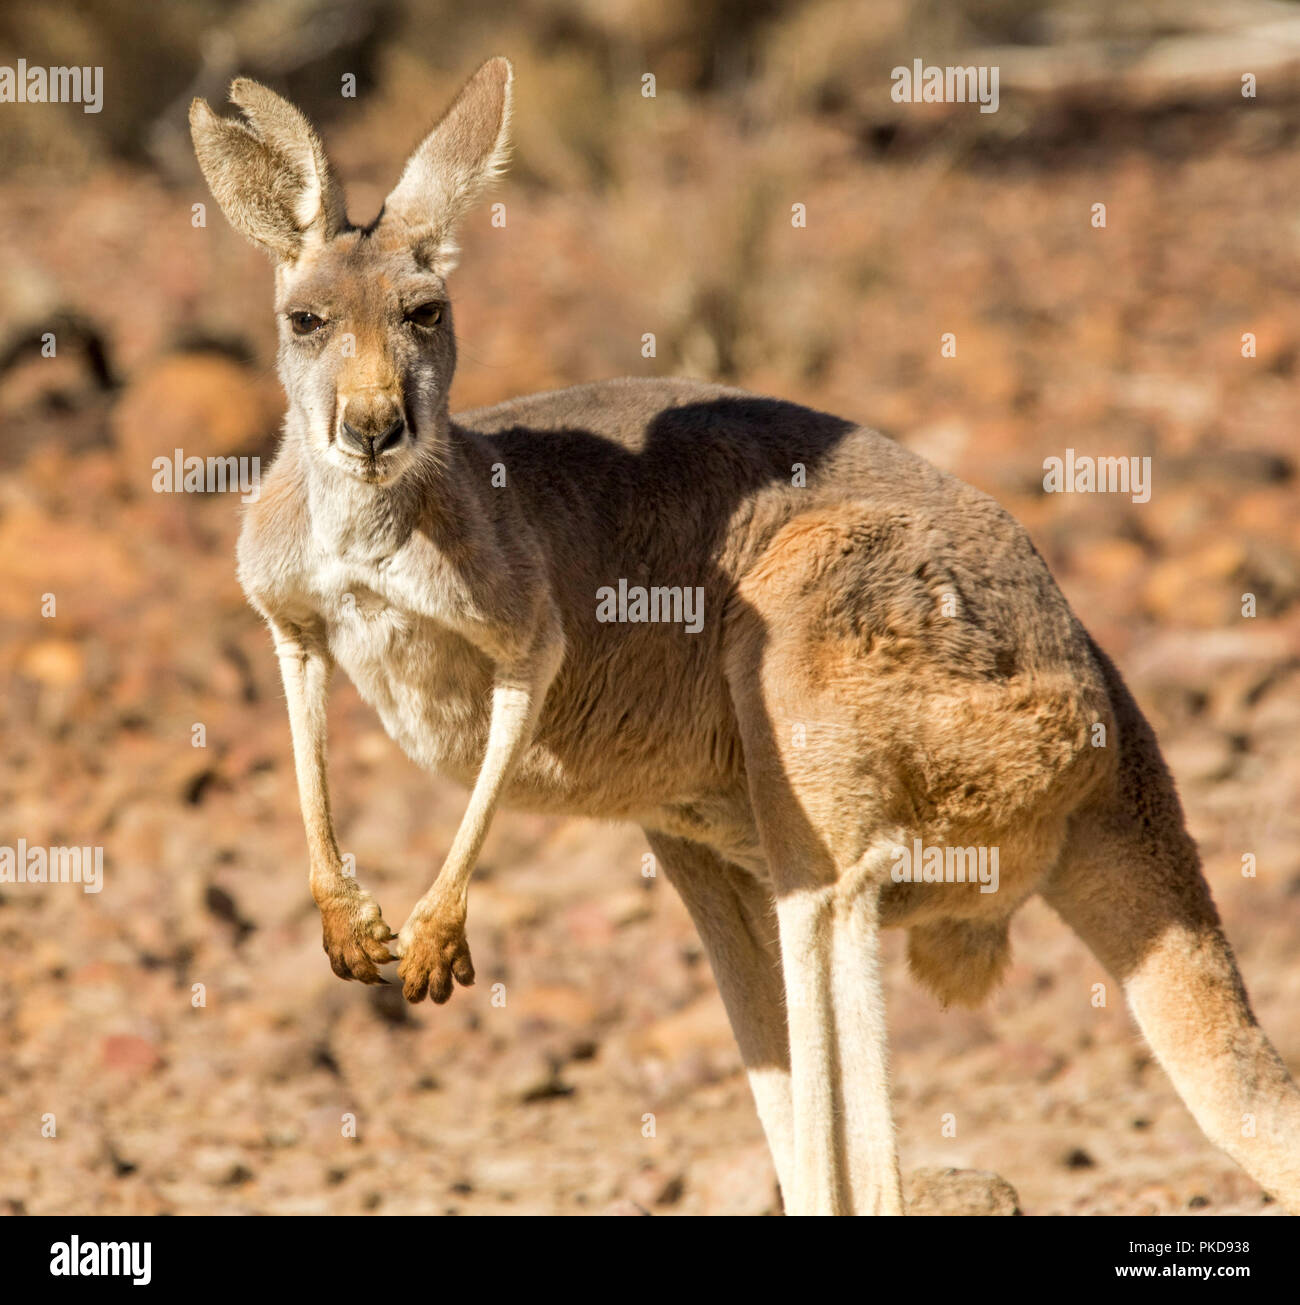 Red kangaroo, Macropus rufus, on barren red soul of Australian outback during drought, staring at camera, at Culgoa Floodplains National Park, Qld Stock Photo